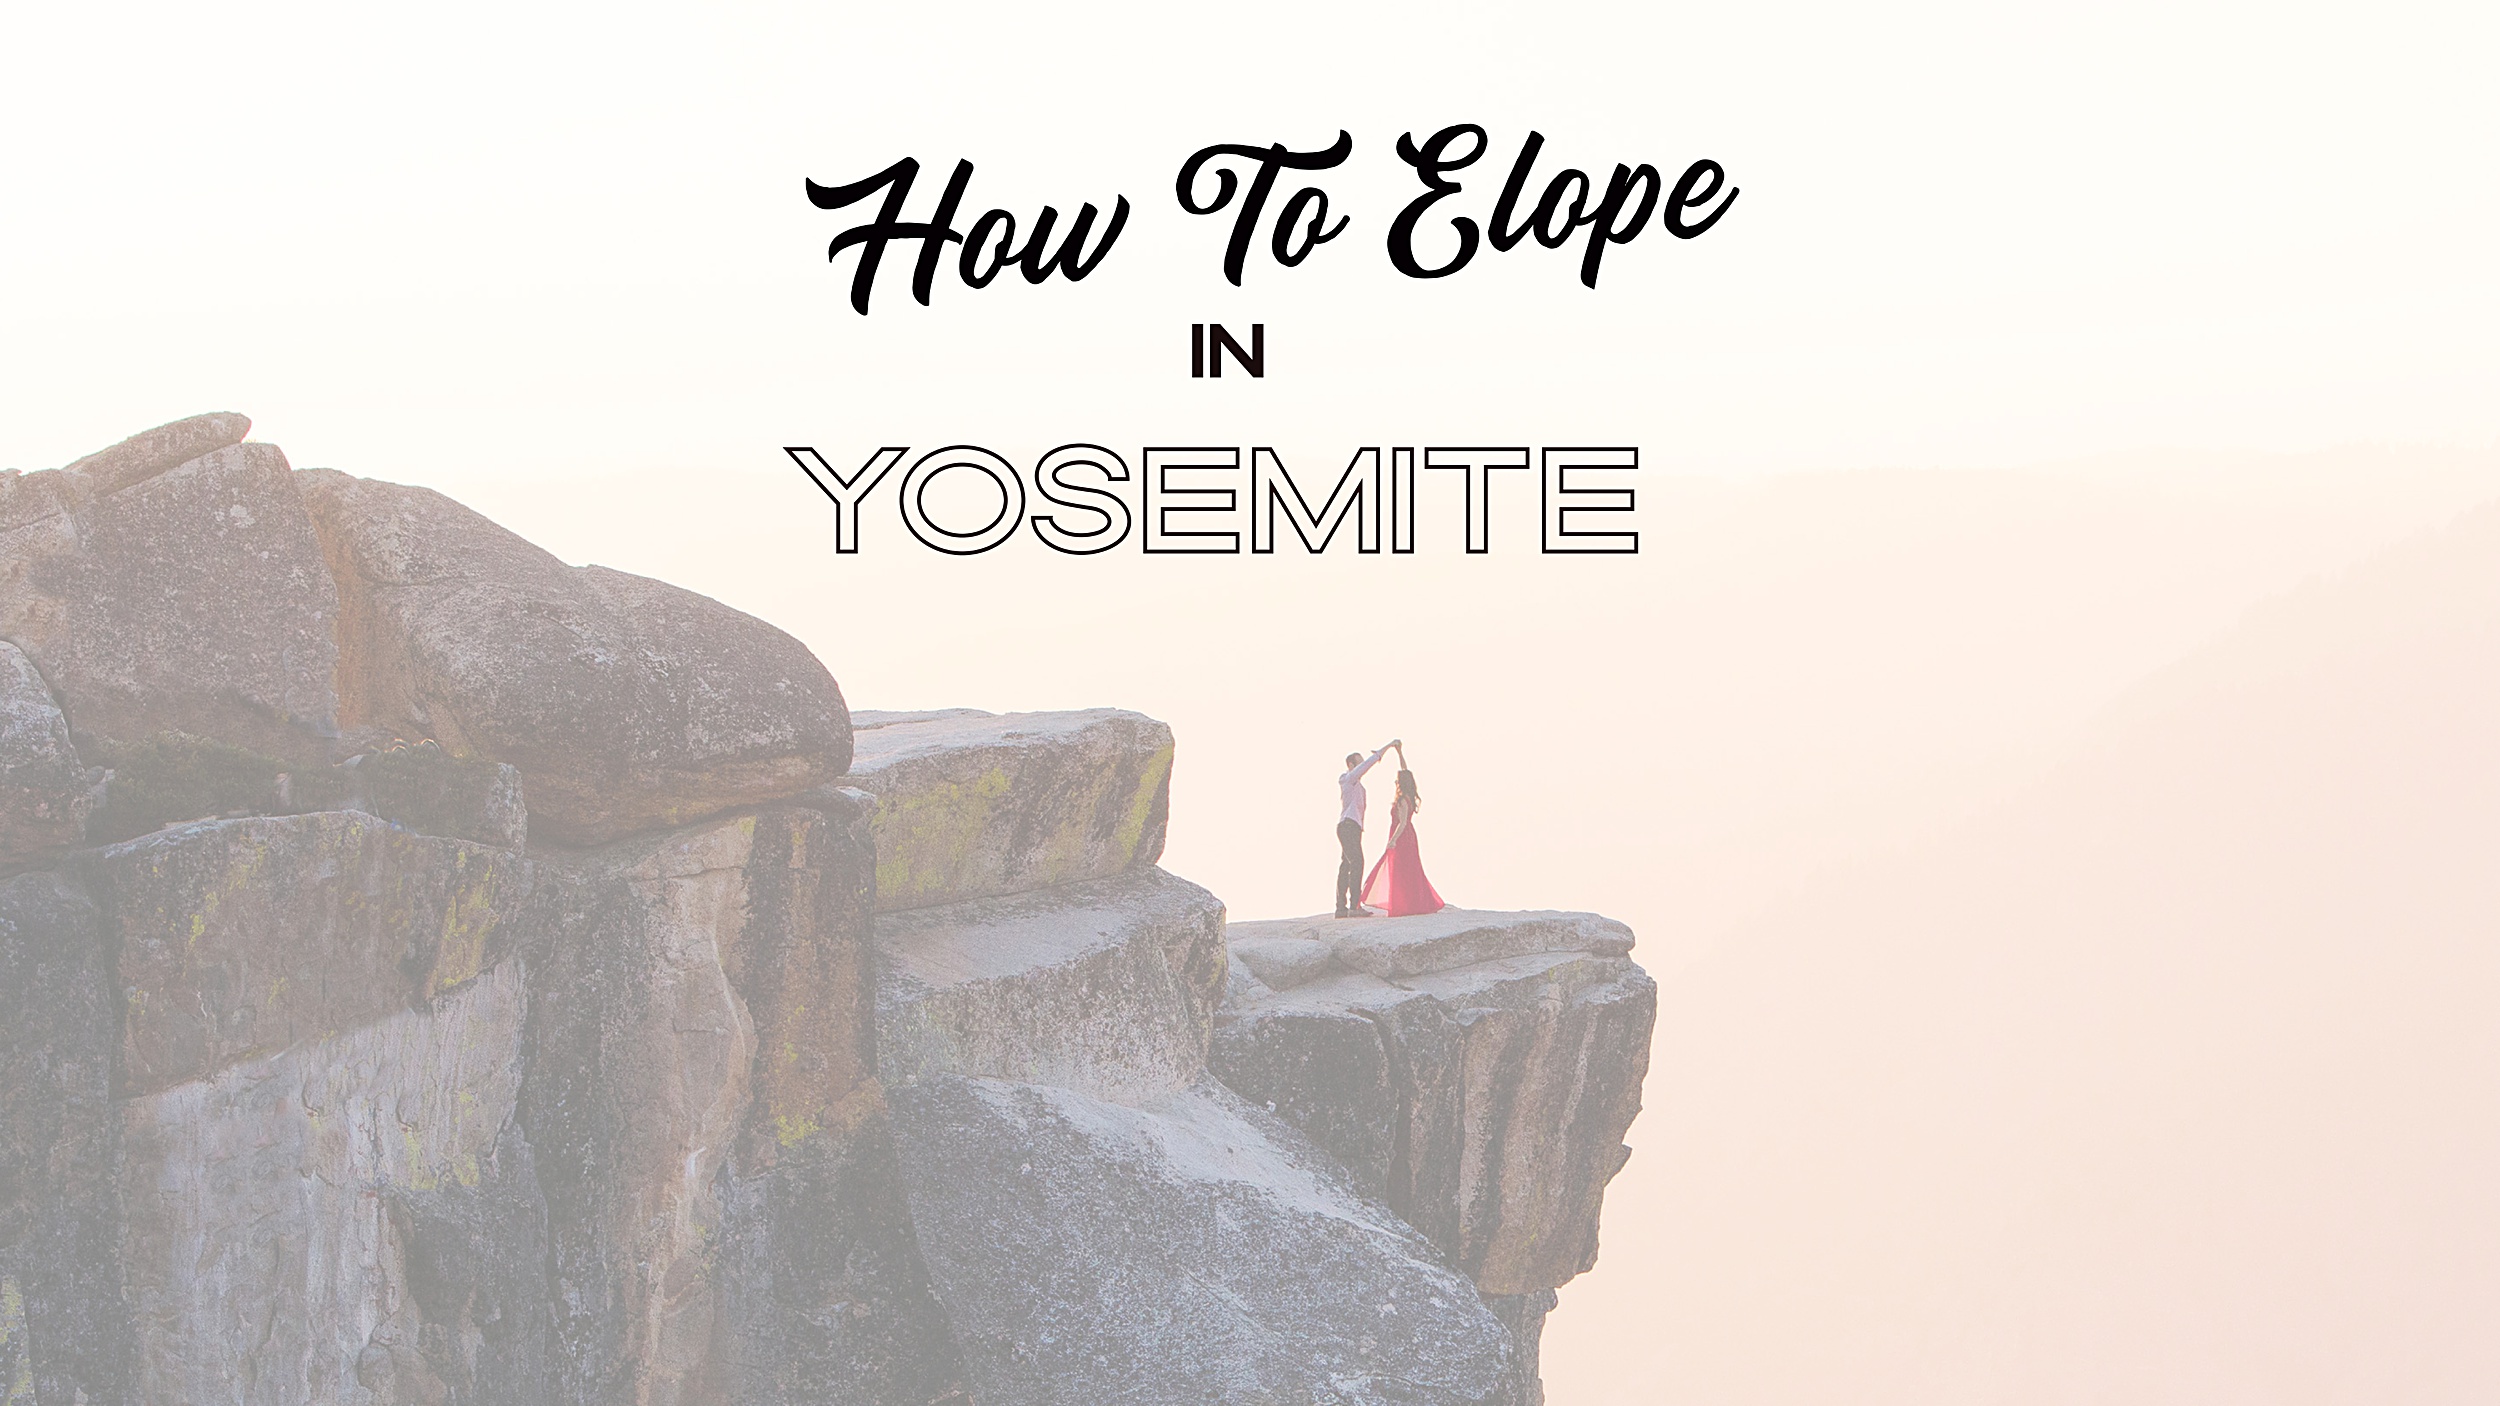 How-to-Elope-In-Yosemite_0001 Eloping in Yosemite: Your How-to Guide